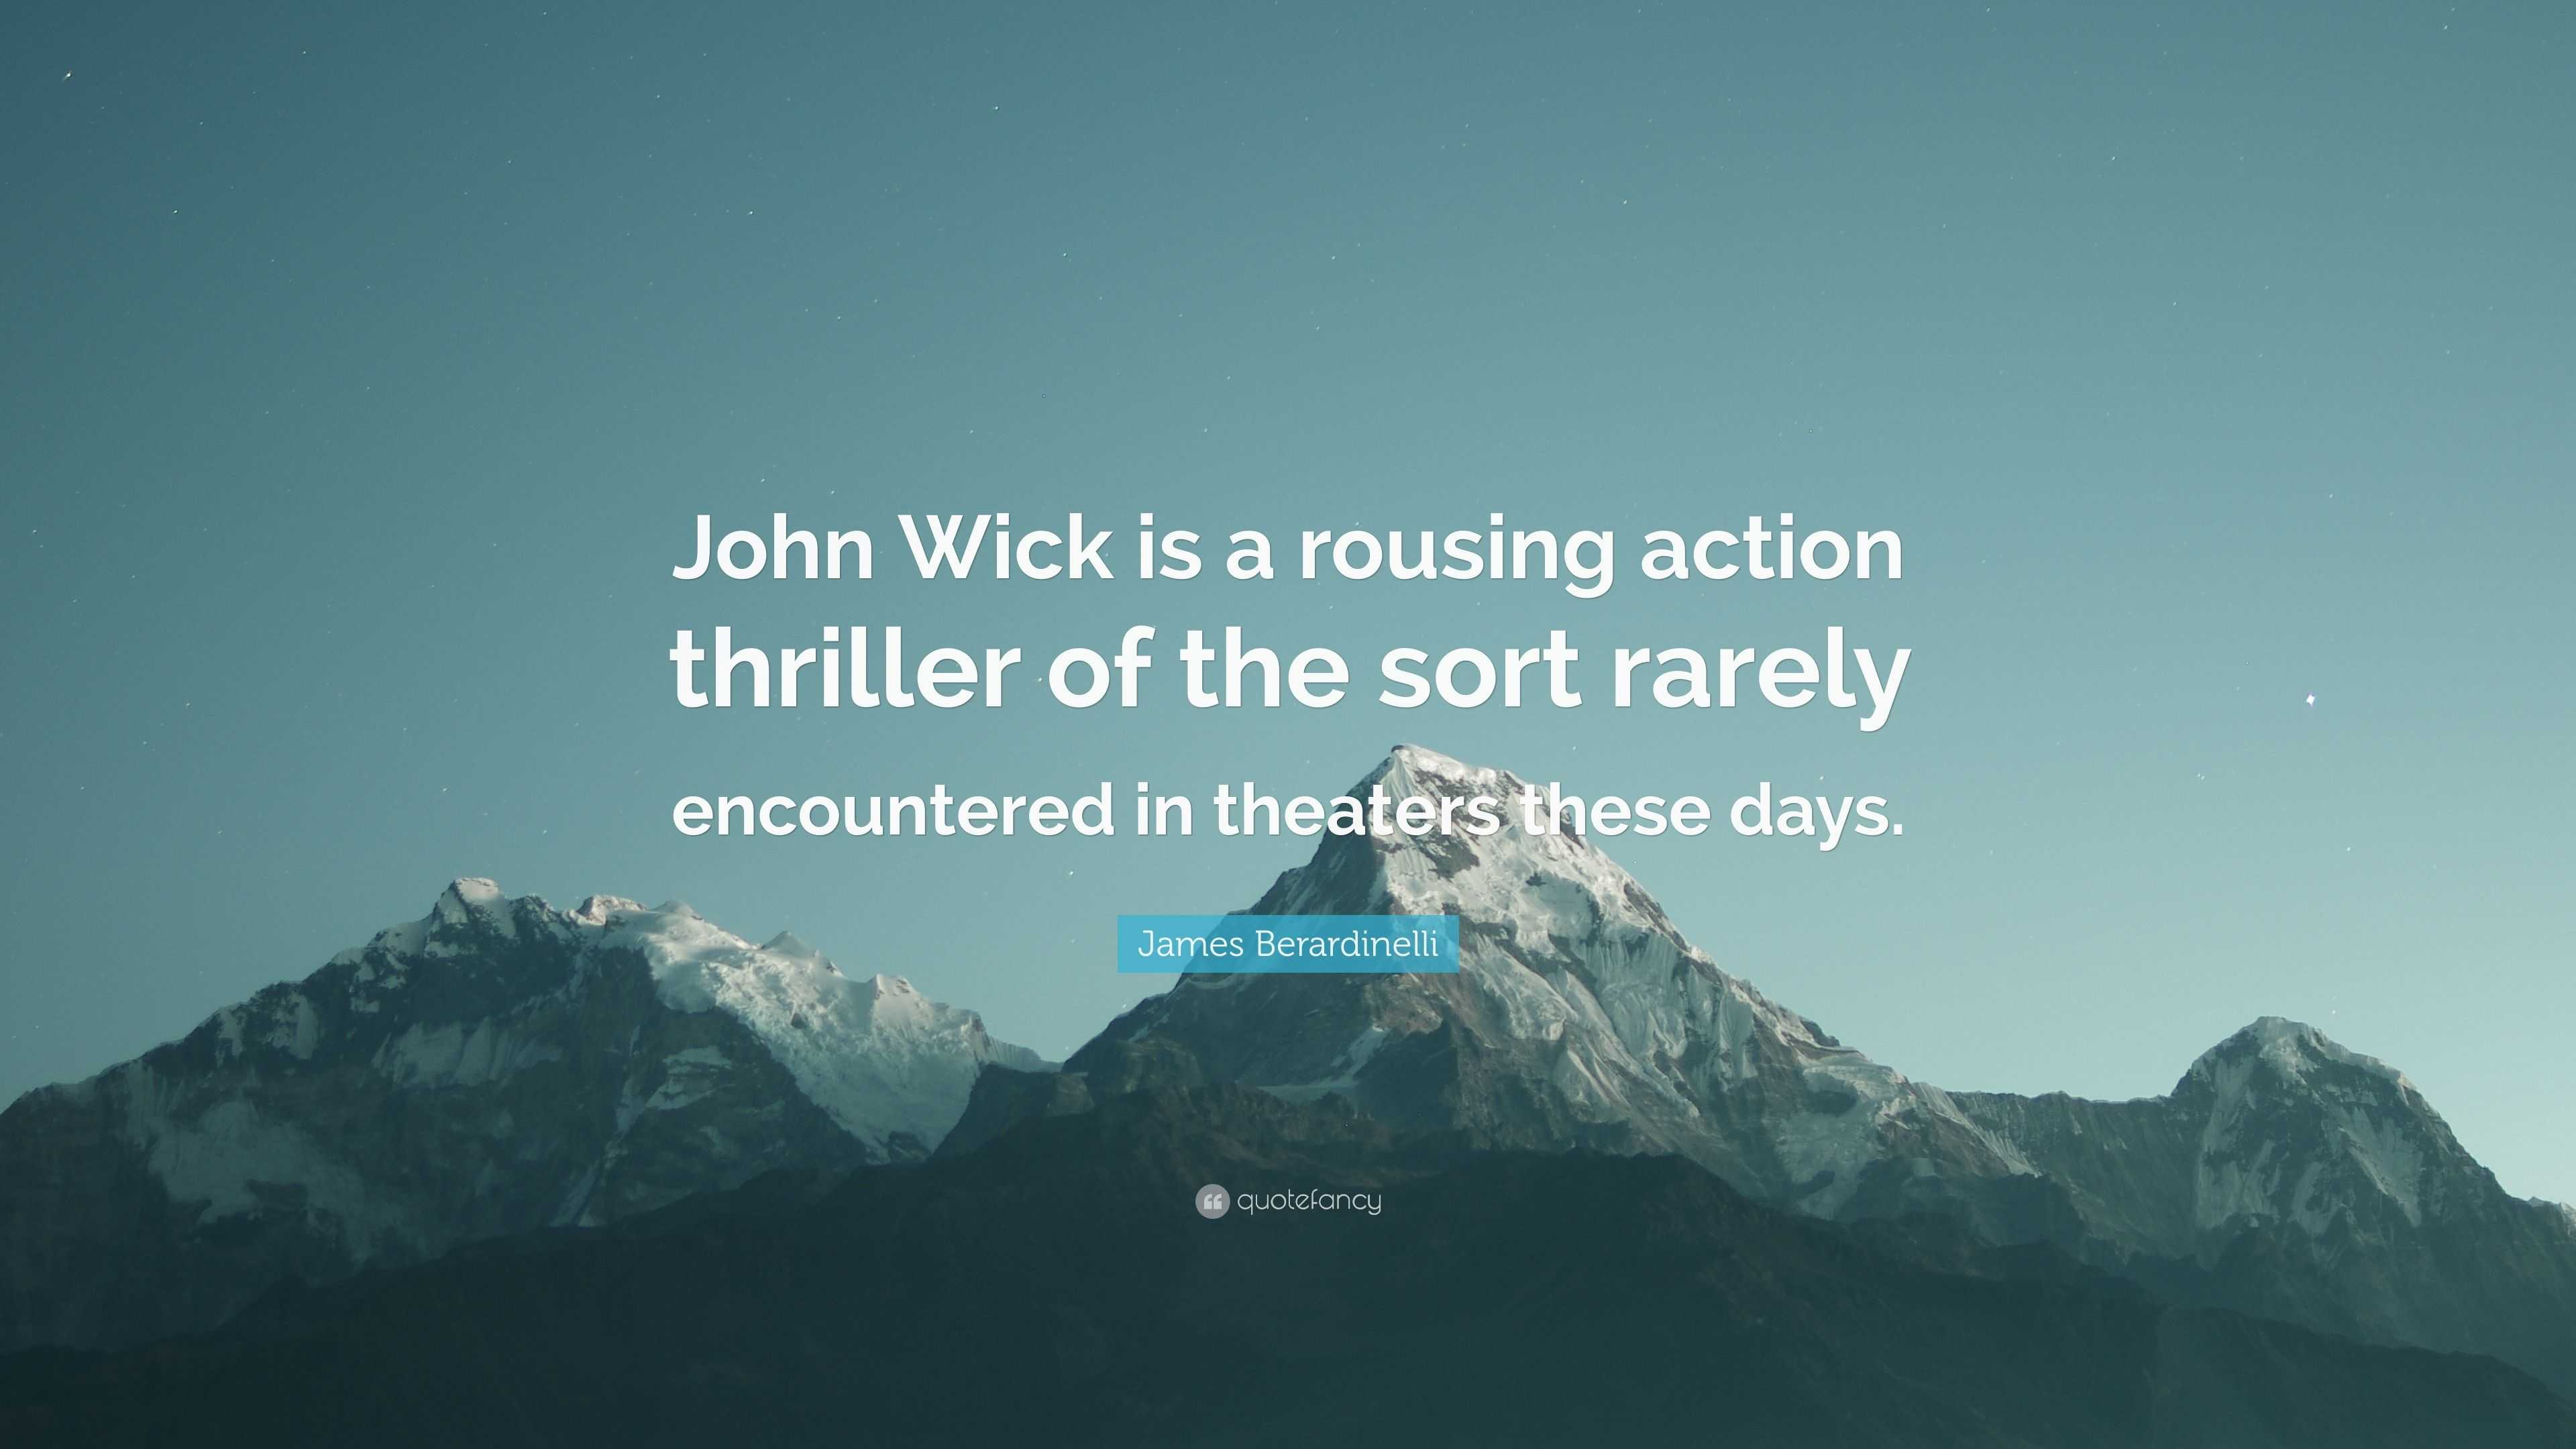 James Berardinelli Quote: “John Wick is a rousing action thriller of the  sort rarely encountered in